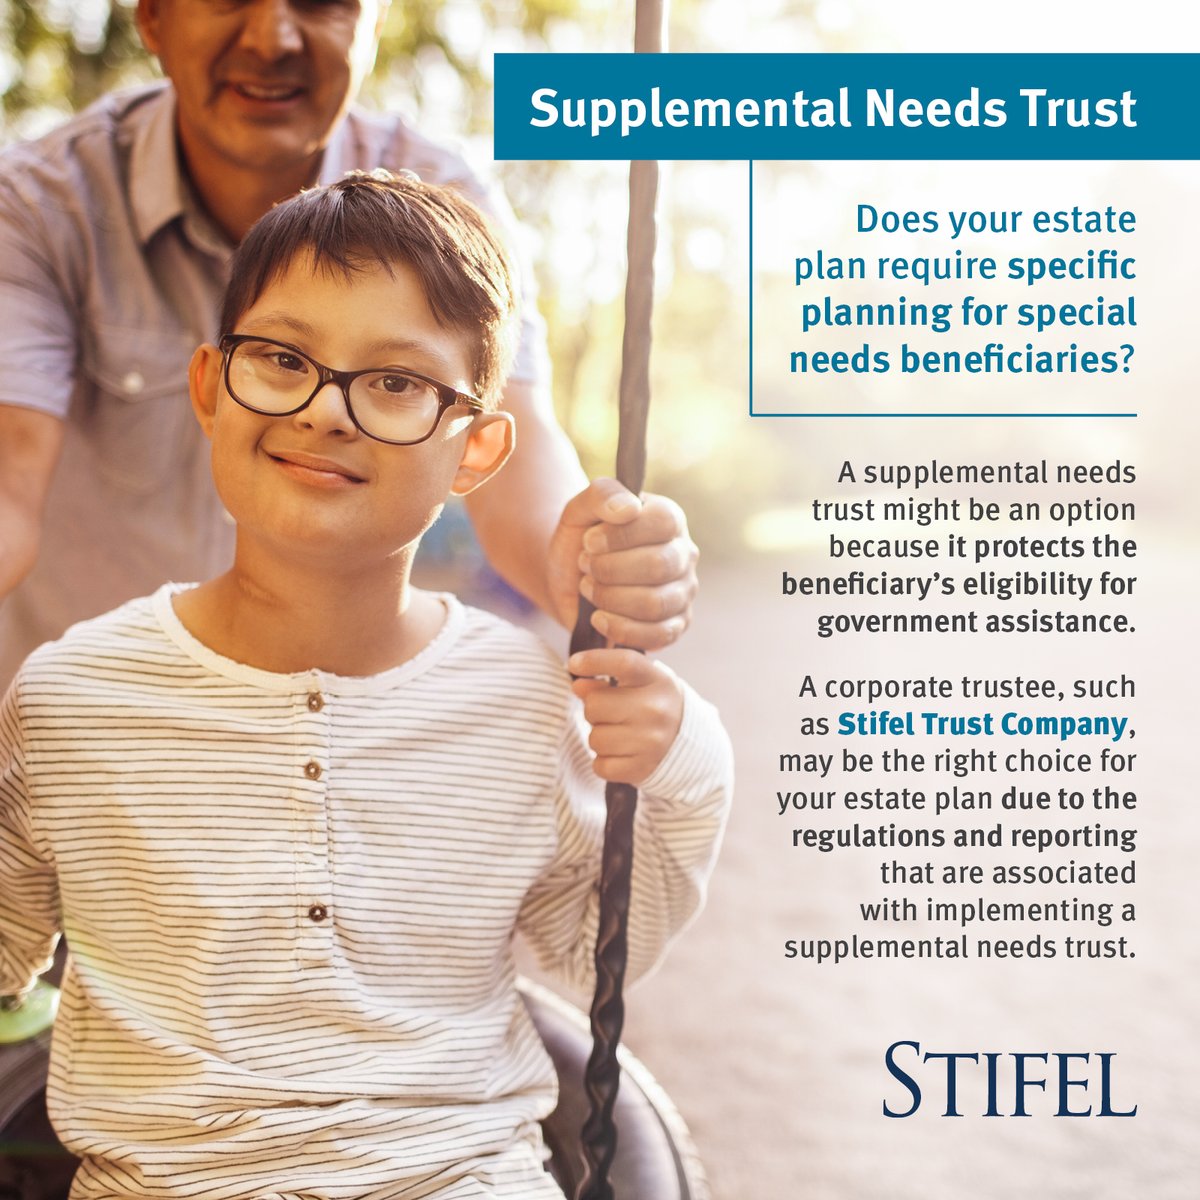 A supplemental needs trust is an important type of trust for people with disabilities or access and functional needs. It helps provide individuals with financial assistance for a beneficiary without disqualifying them from receiving government benefits, such as Medicaid or…